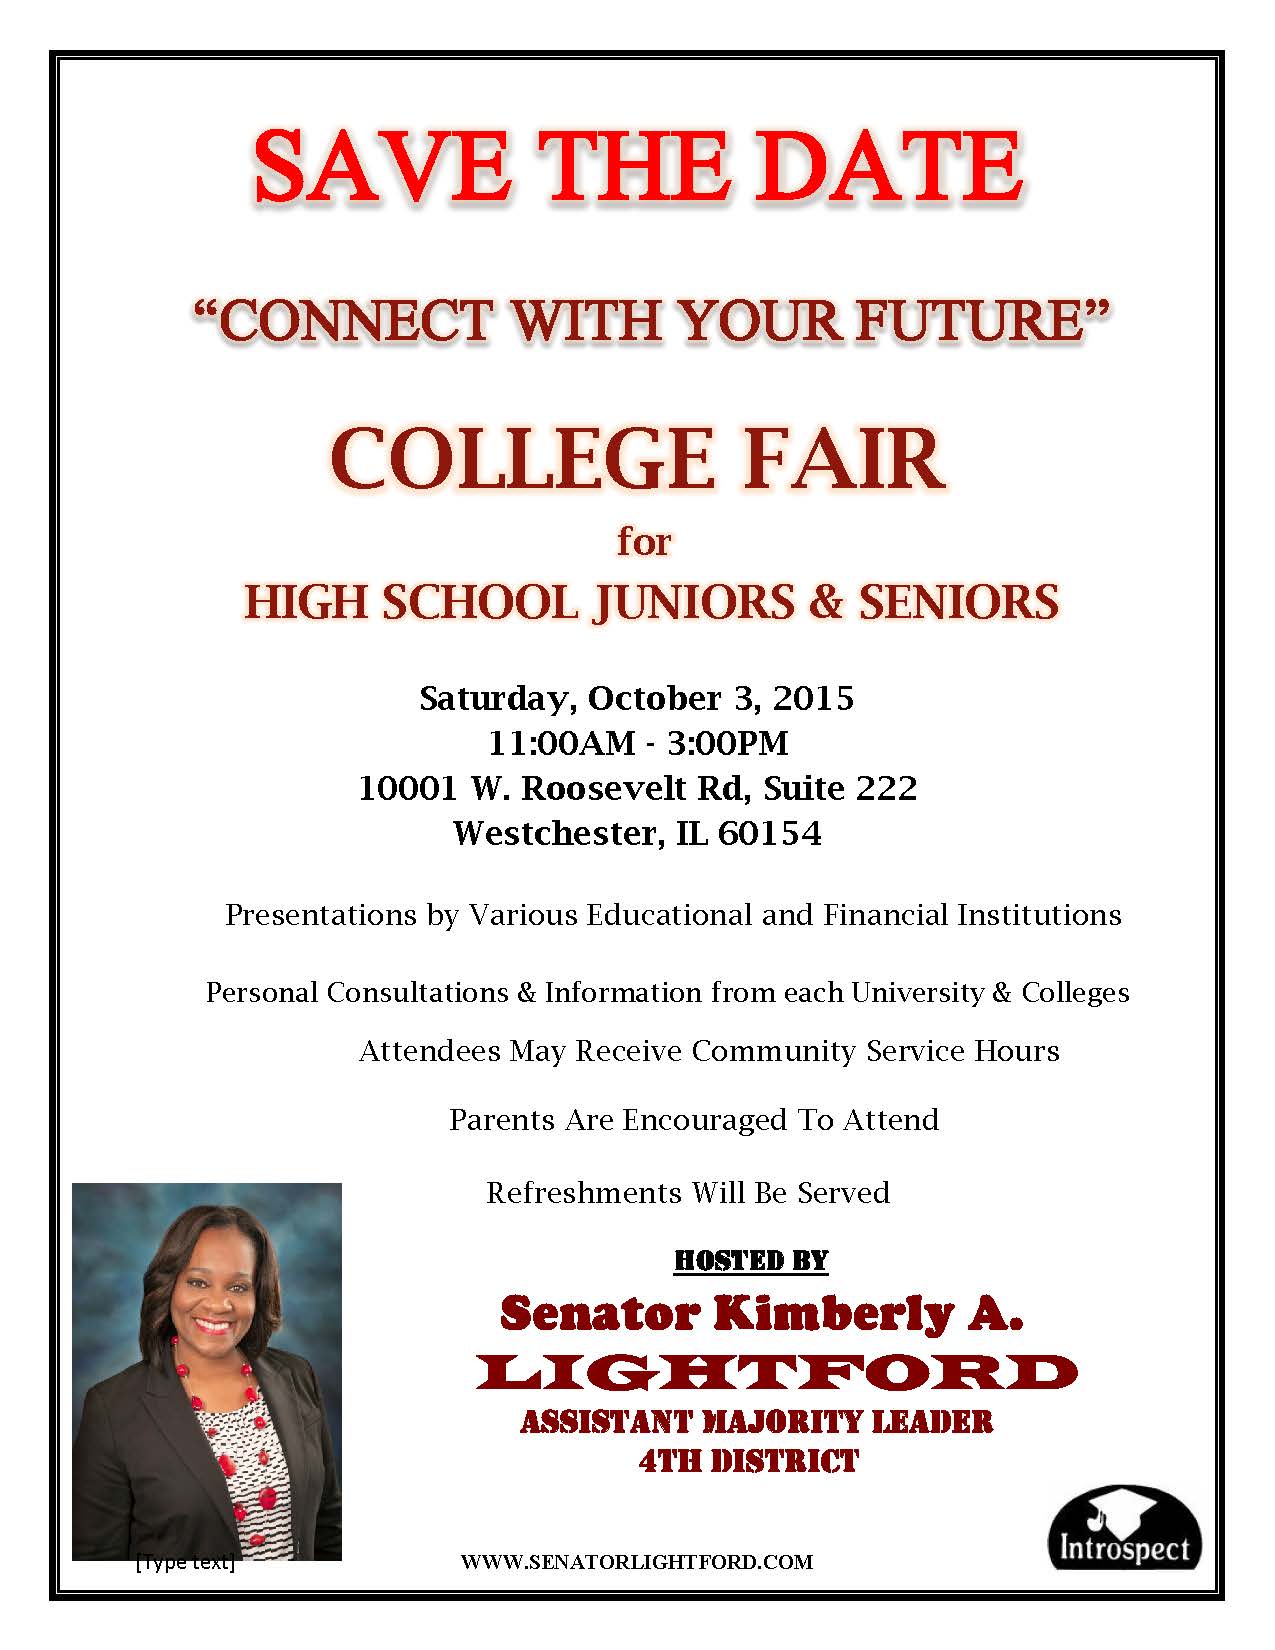 Offical College Fair Save The Date 2